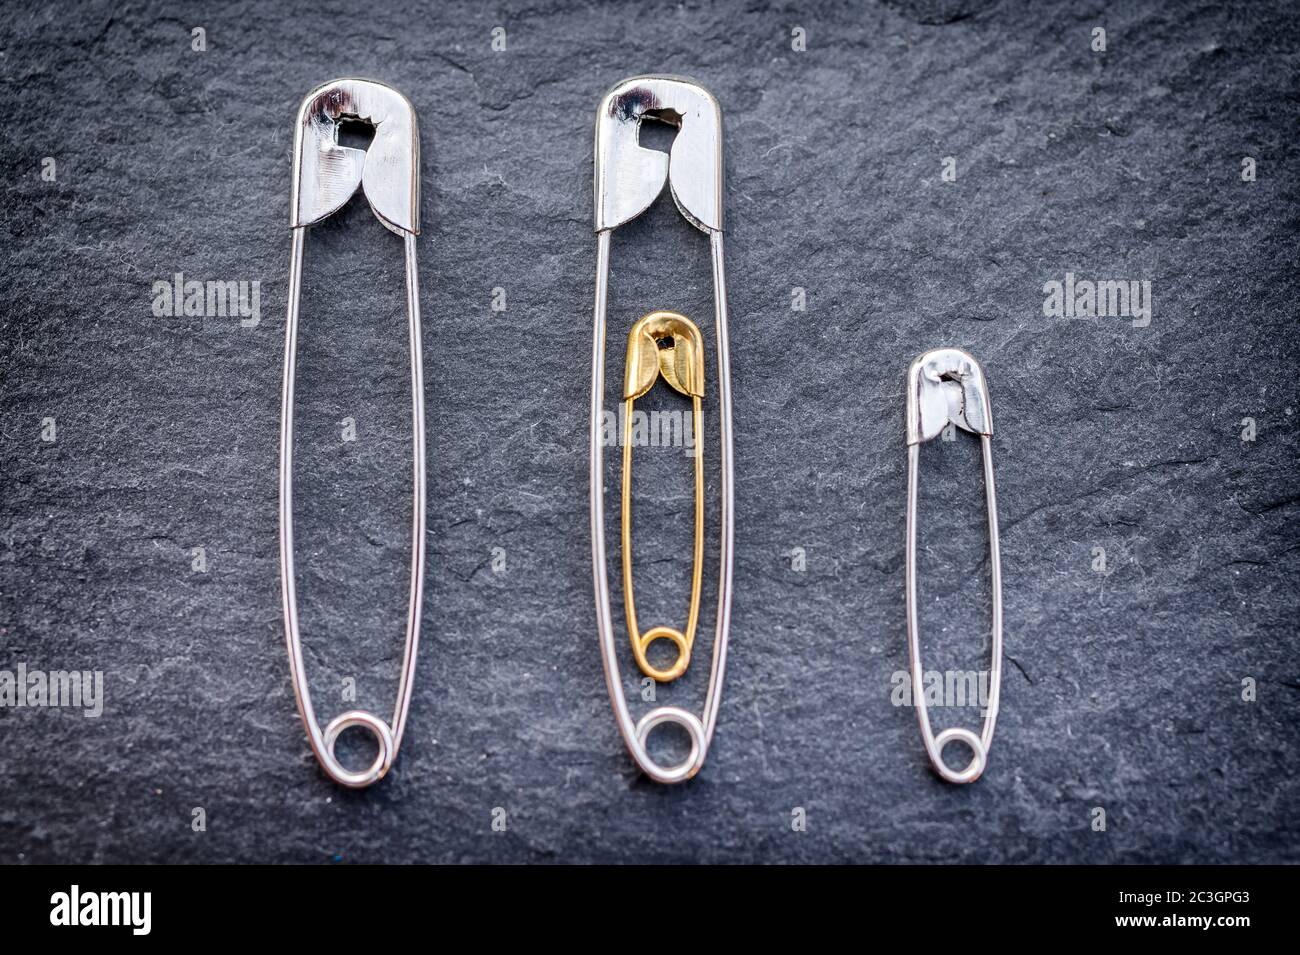 Baby Colored Safety Pins stock photo. Image of purple - 22967956